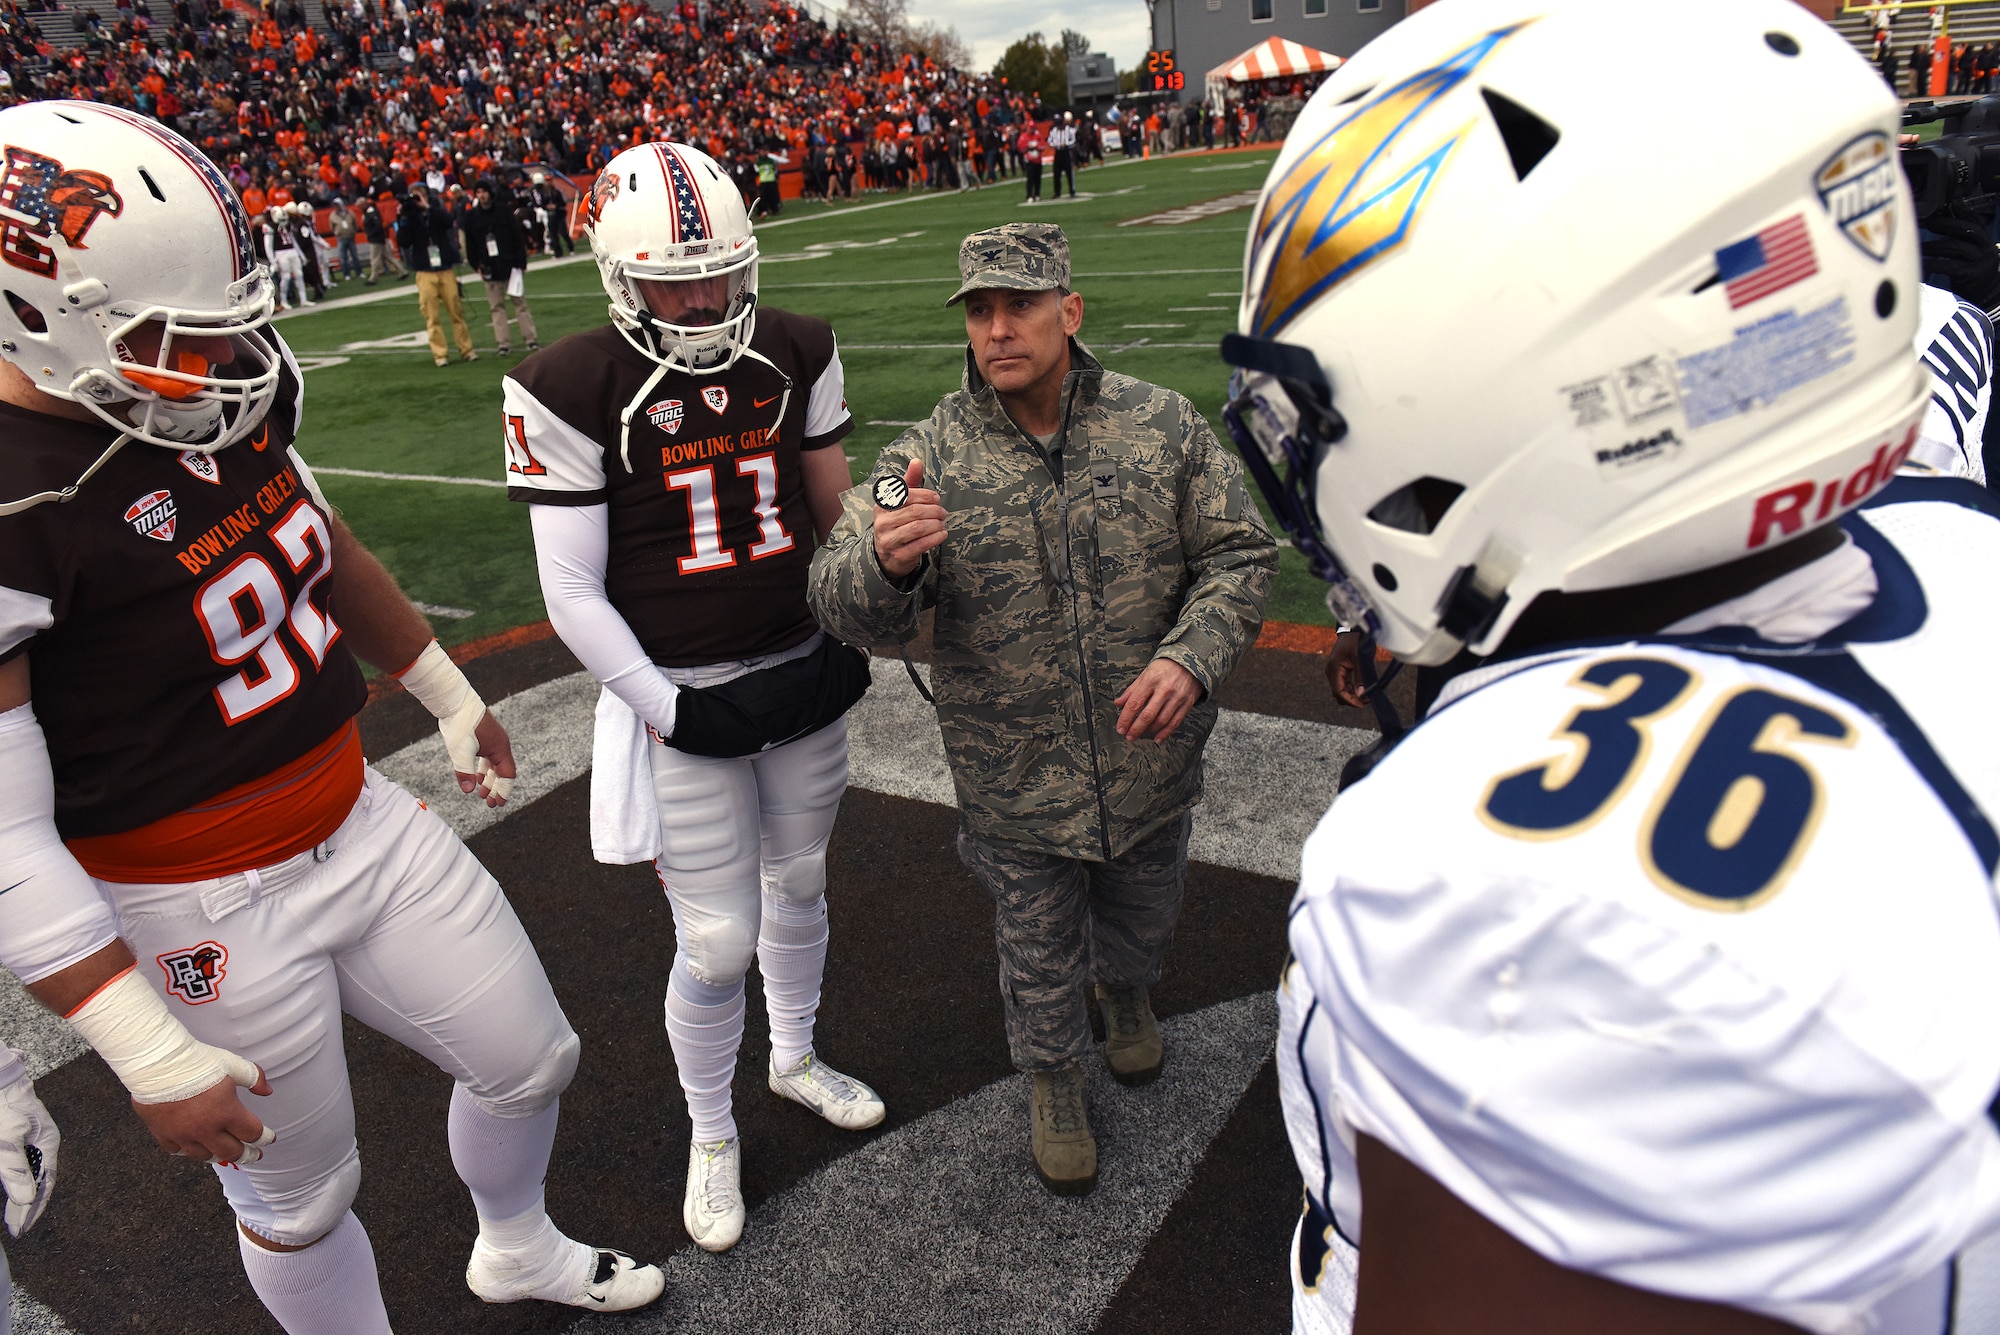 U.S. Air Force Col. Craig Baker, commander of the 180th Fighter Wing in Swanton, Ohio, performs the coin toss to start the Bowling Green State University Falcons Military Appreciation football game against the Akron Zips in Bowling Green, Ohio on Oct. 17, 2015. The Military Appreciation event, which was also the university’s homecoming game, was free for military members, highlighted veterans and their families on the field, and strengthened the community ties the 180th Fighter Wing strives to create. (Air National Guard photo by Tech. Sgt. Nic Kuetemeyer/released)